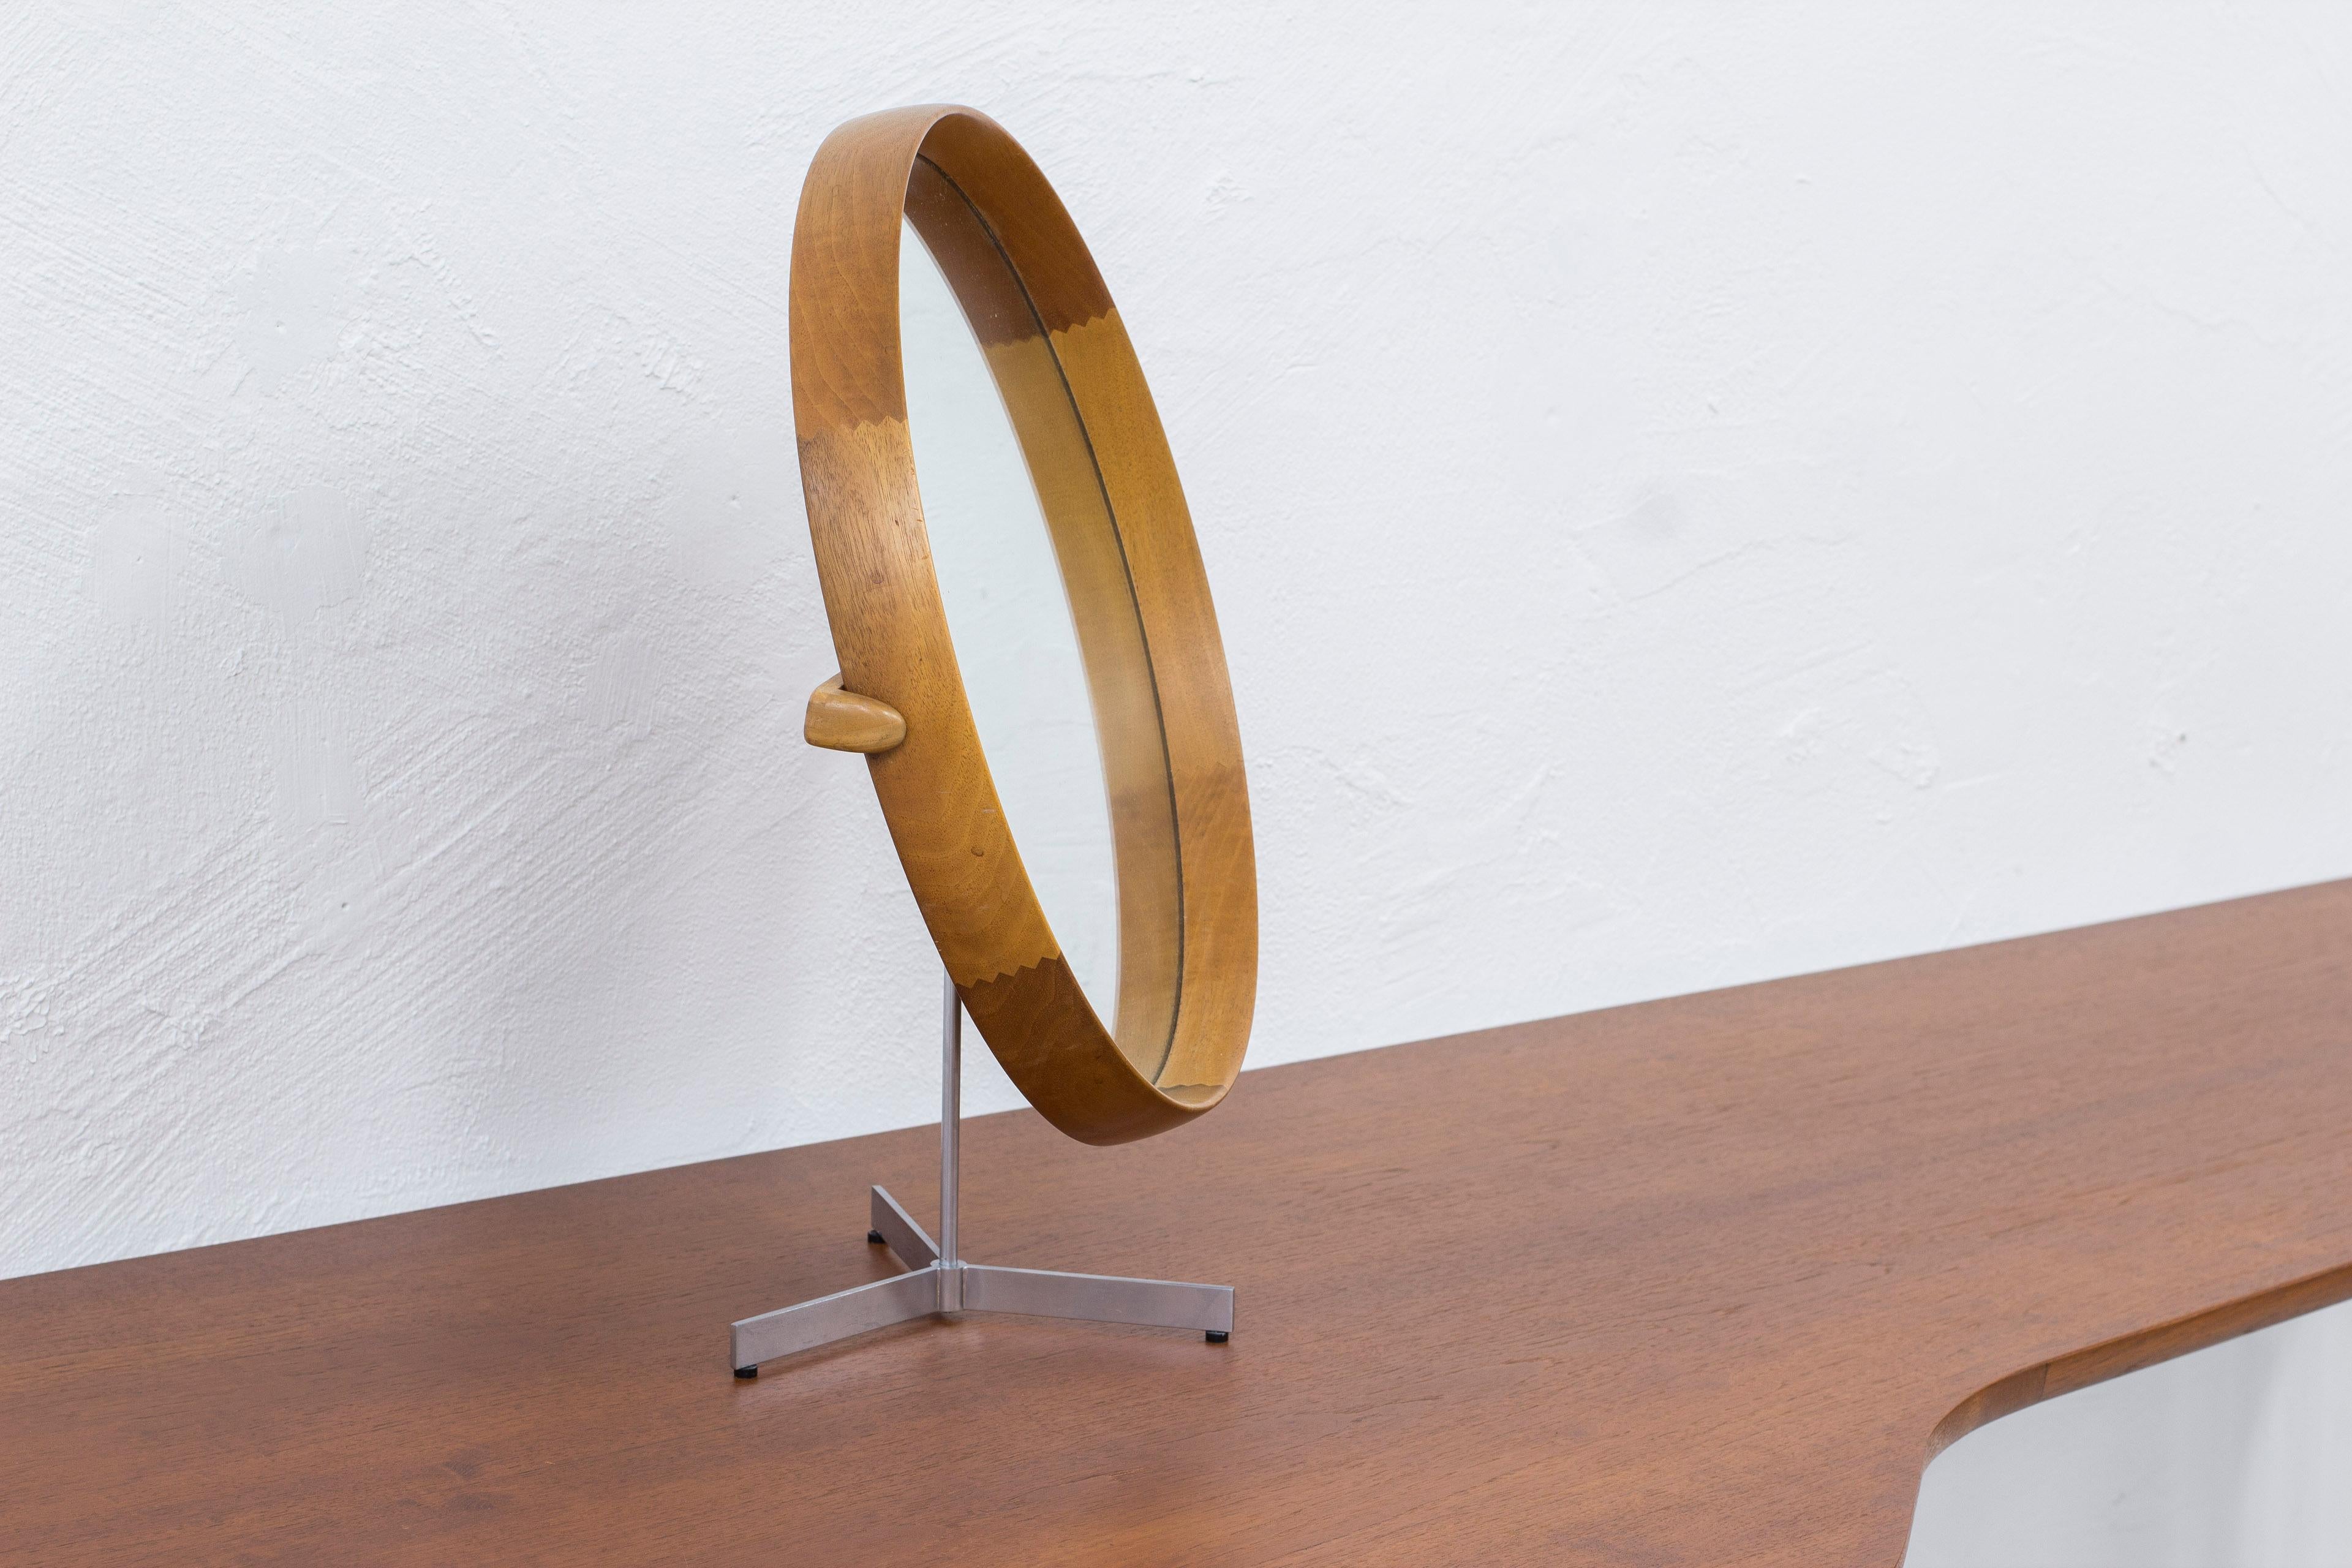 Large table mirror designed by Uno & Östen Kristiansson. Produced by Swedish company Luxus during the 1950s. Frame made from solid beech. Zipper joinery on the frame and the back piece. Base in brushed aluminum. Adjustable in angle and swiveling.